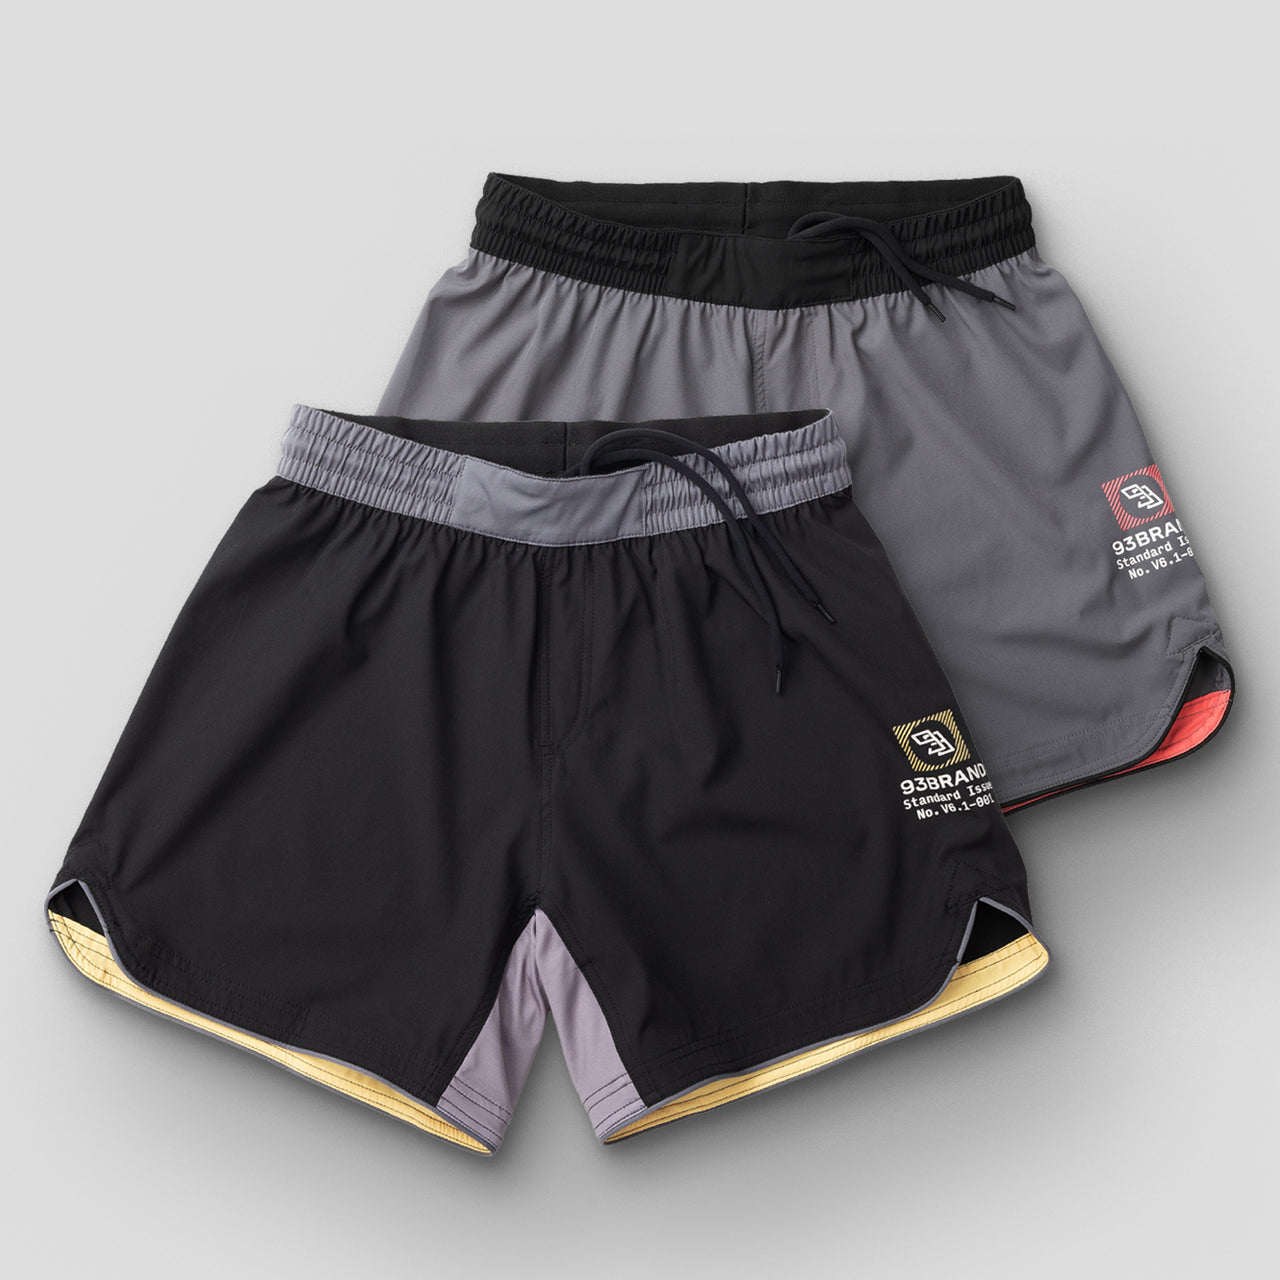 93brand Standard Issue Grappling Shorts 2PACK (Regular Length) - Black/Yellow & Grey/Red